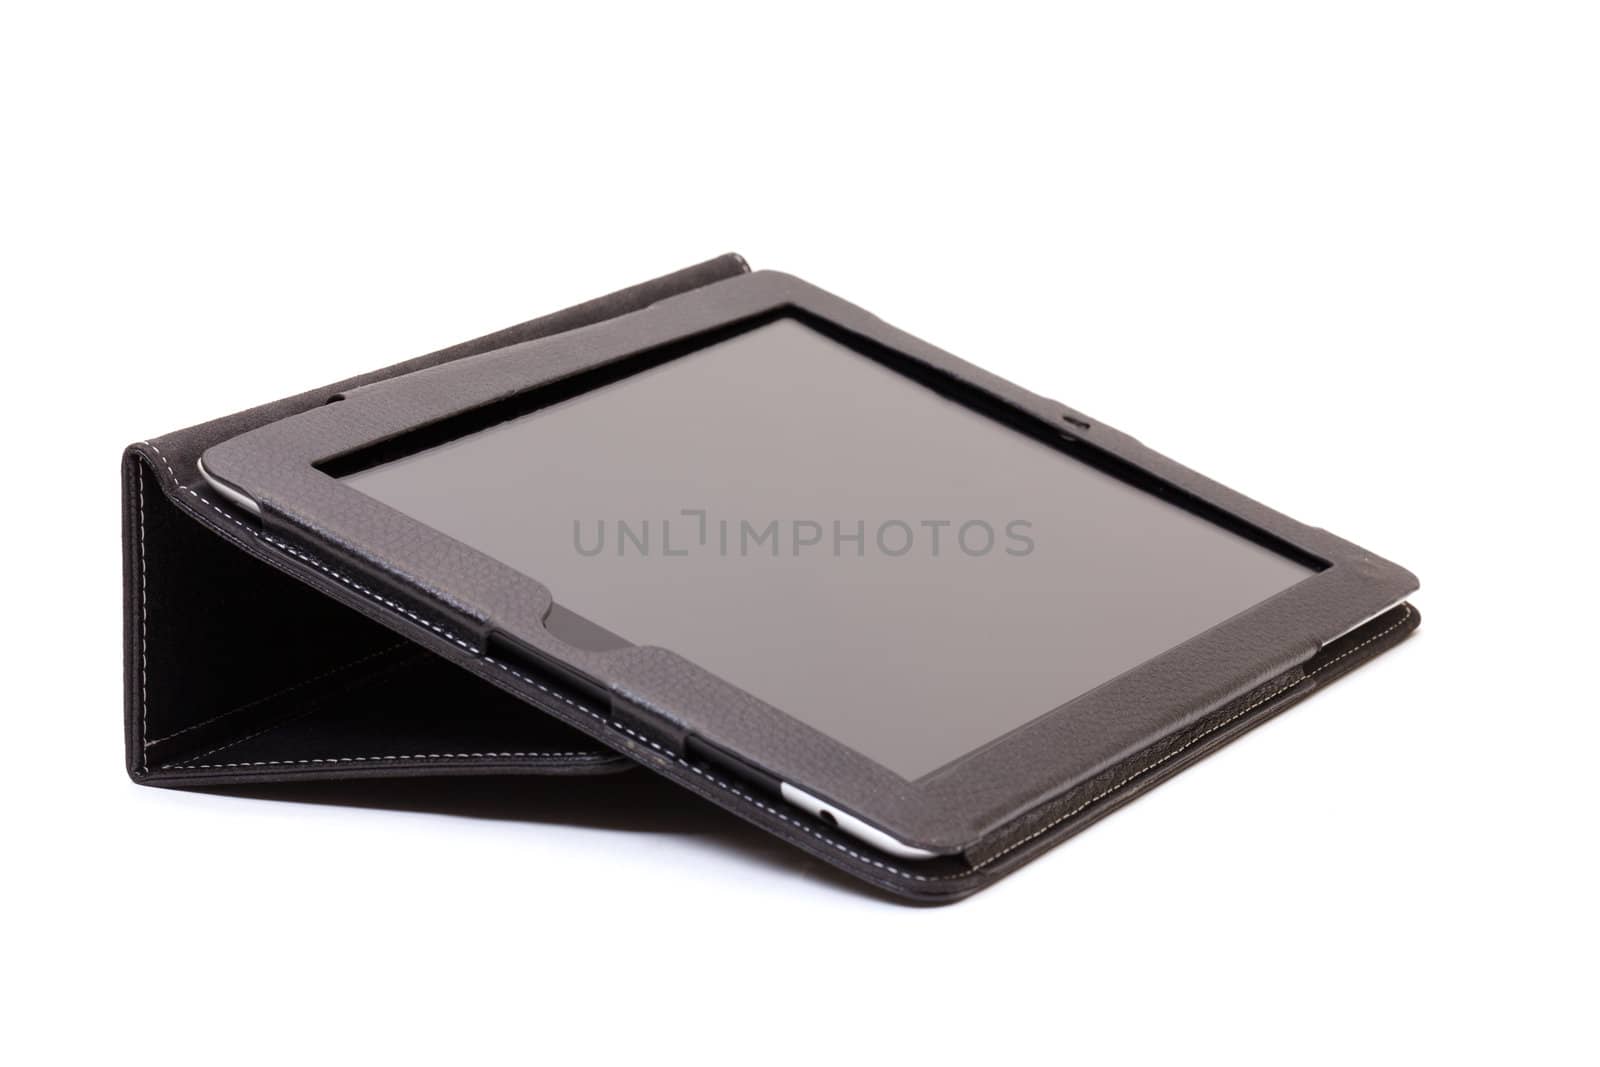 internet tablet in black leather cover  by Discovod